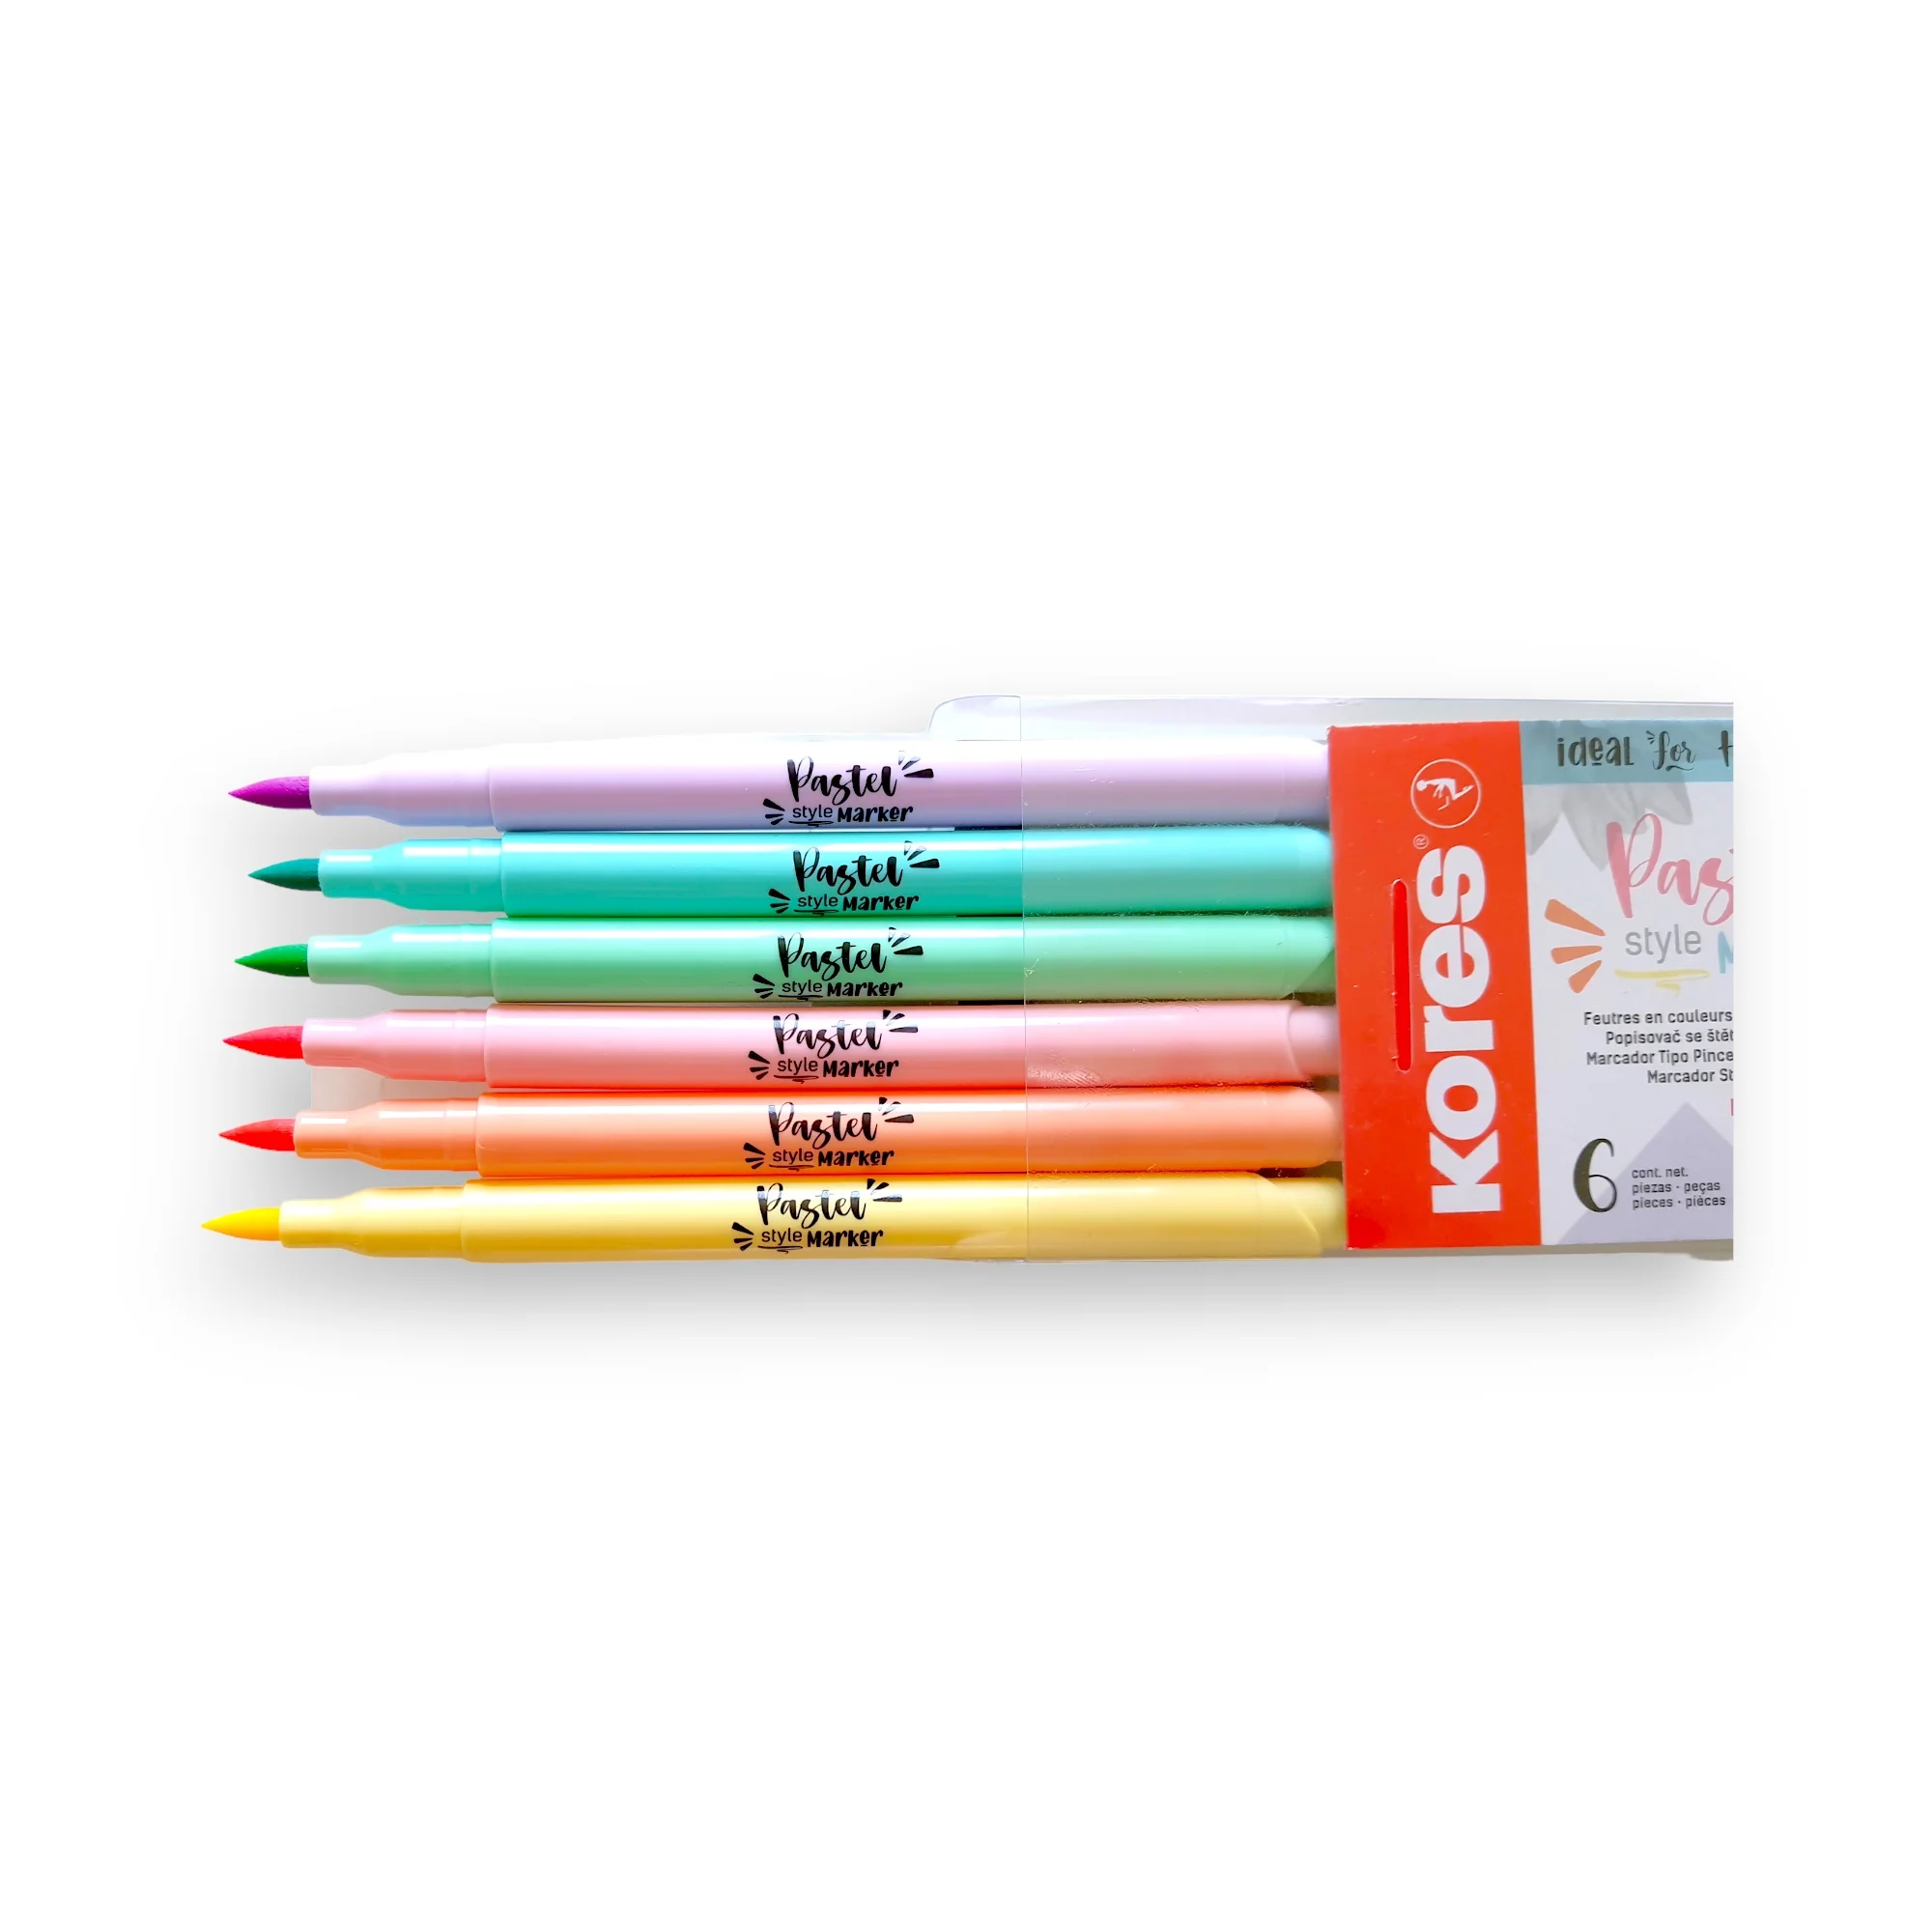 PASTEL STYLE Brush Tip Markers - Kores